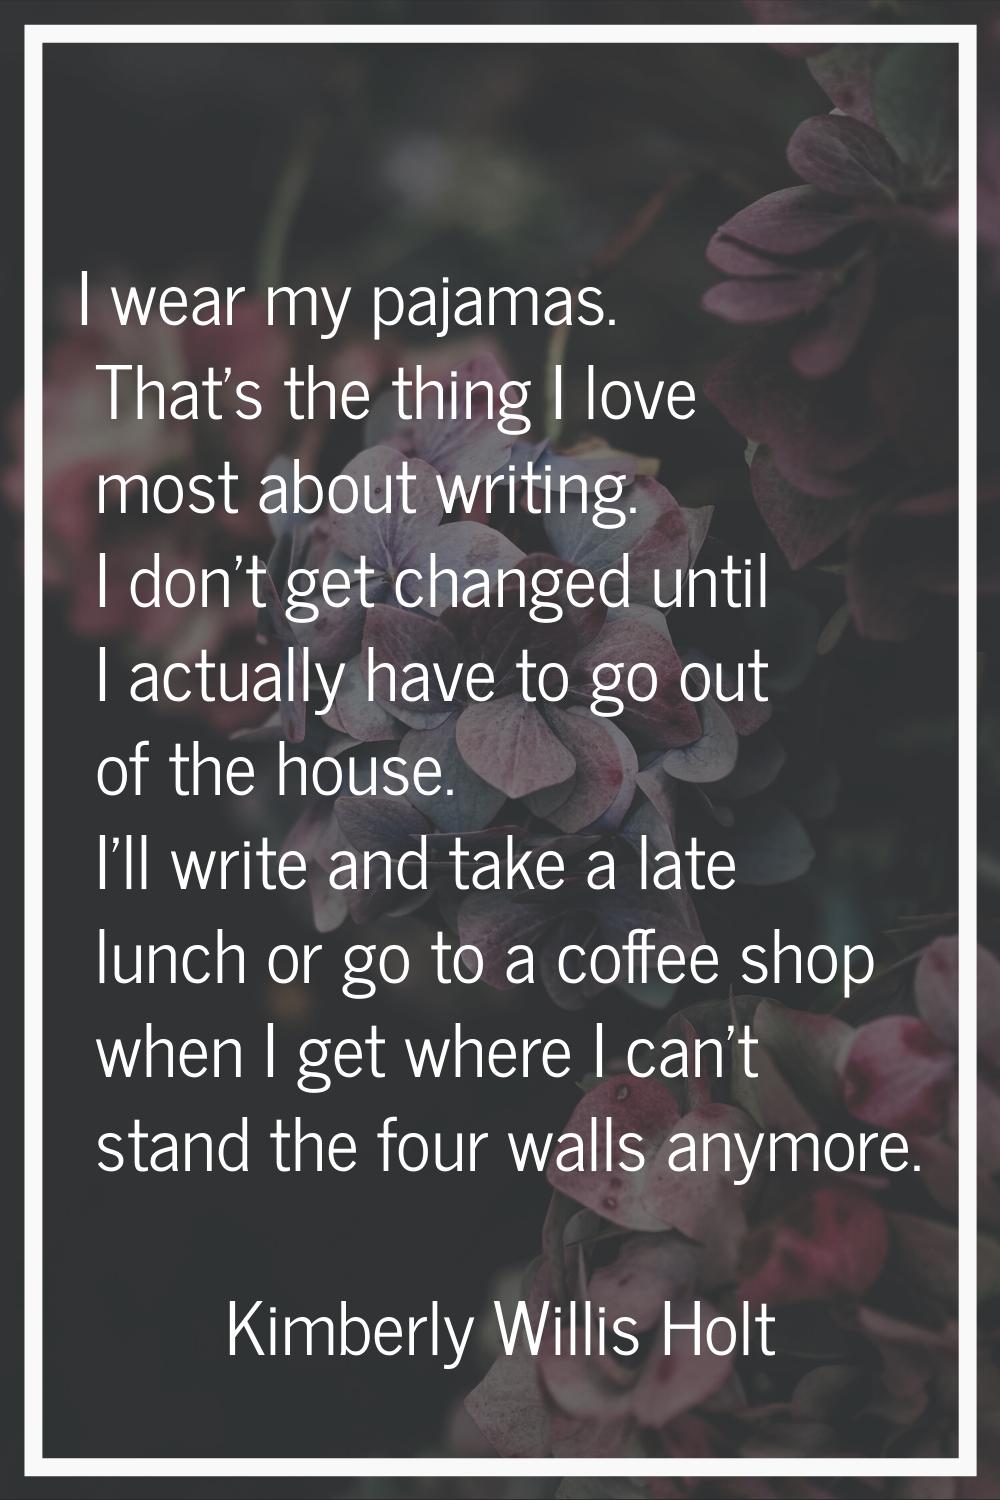 I wear my pajamas. That's the thing I love most about writing. I don't get changed until I actually